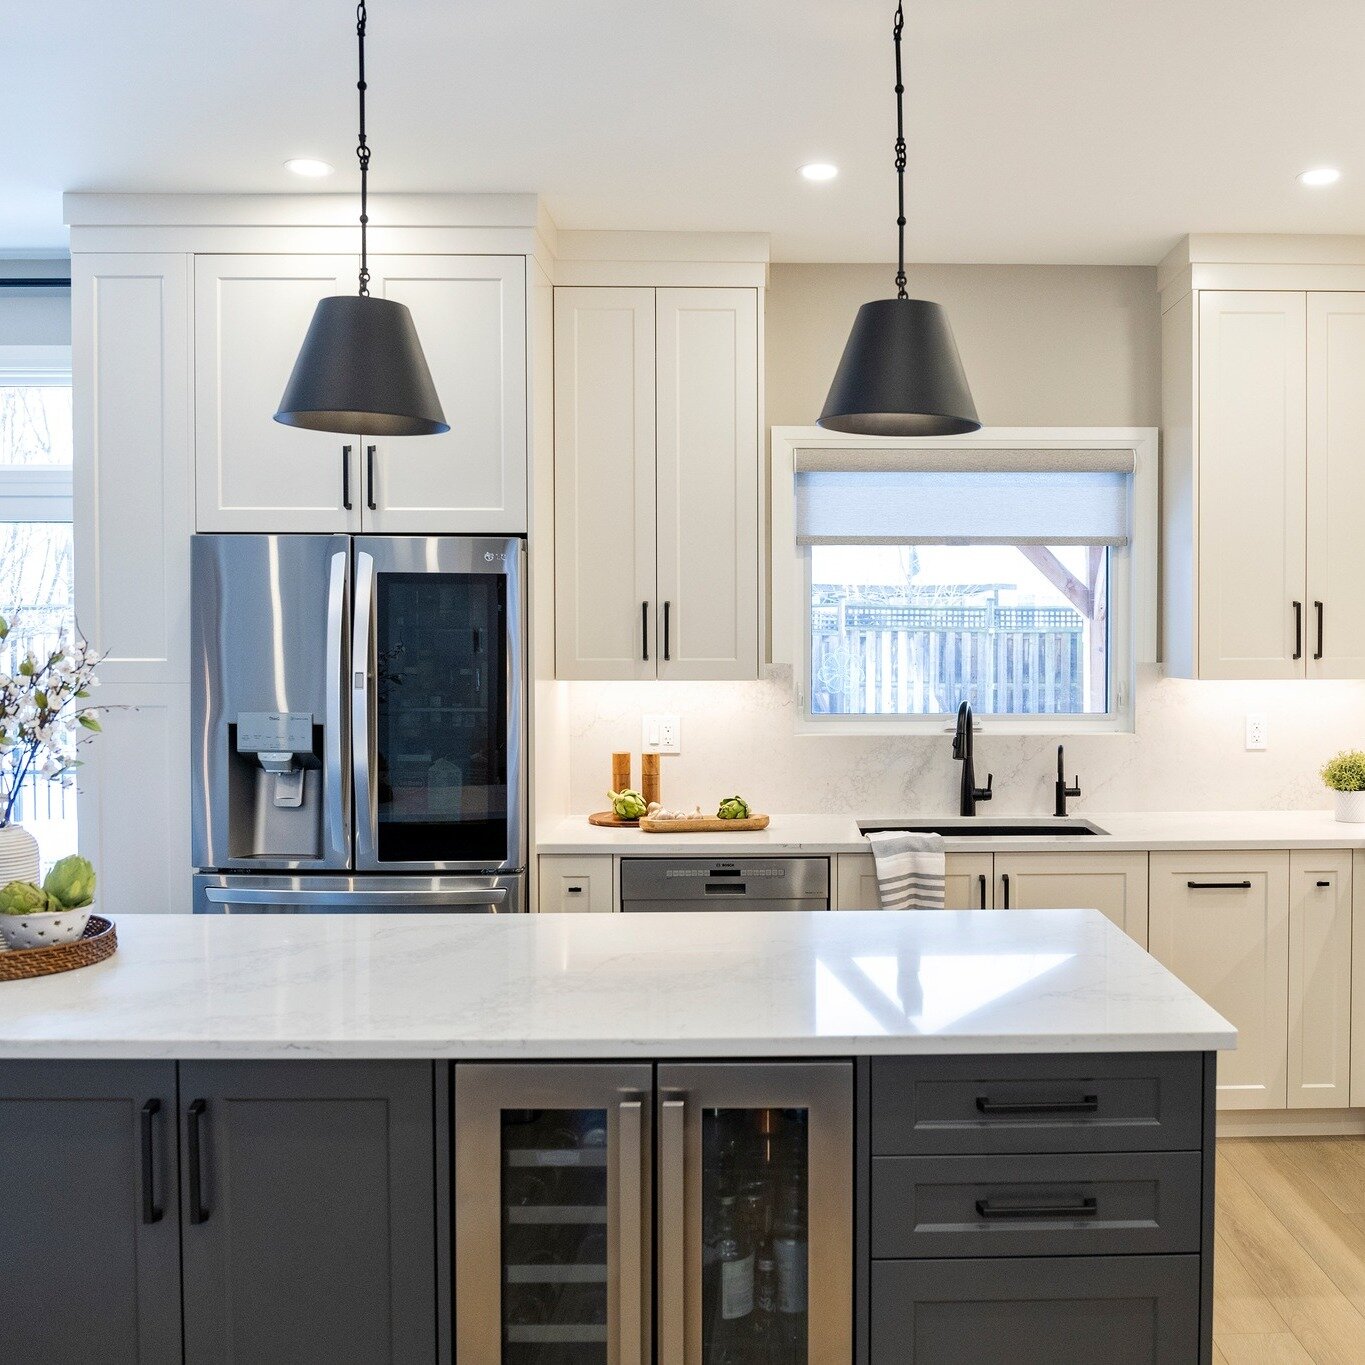 Swipe to see the after, before and during of our #ProjectEastbridge kitchen gut and renovation. We had the pleasure of designing this open concept kitchen and living room space for an incredible family in Waterloo. We couldn't be happier with the fin